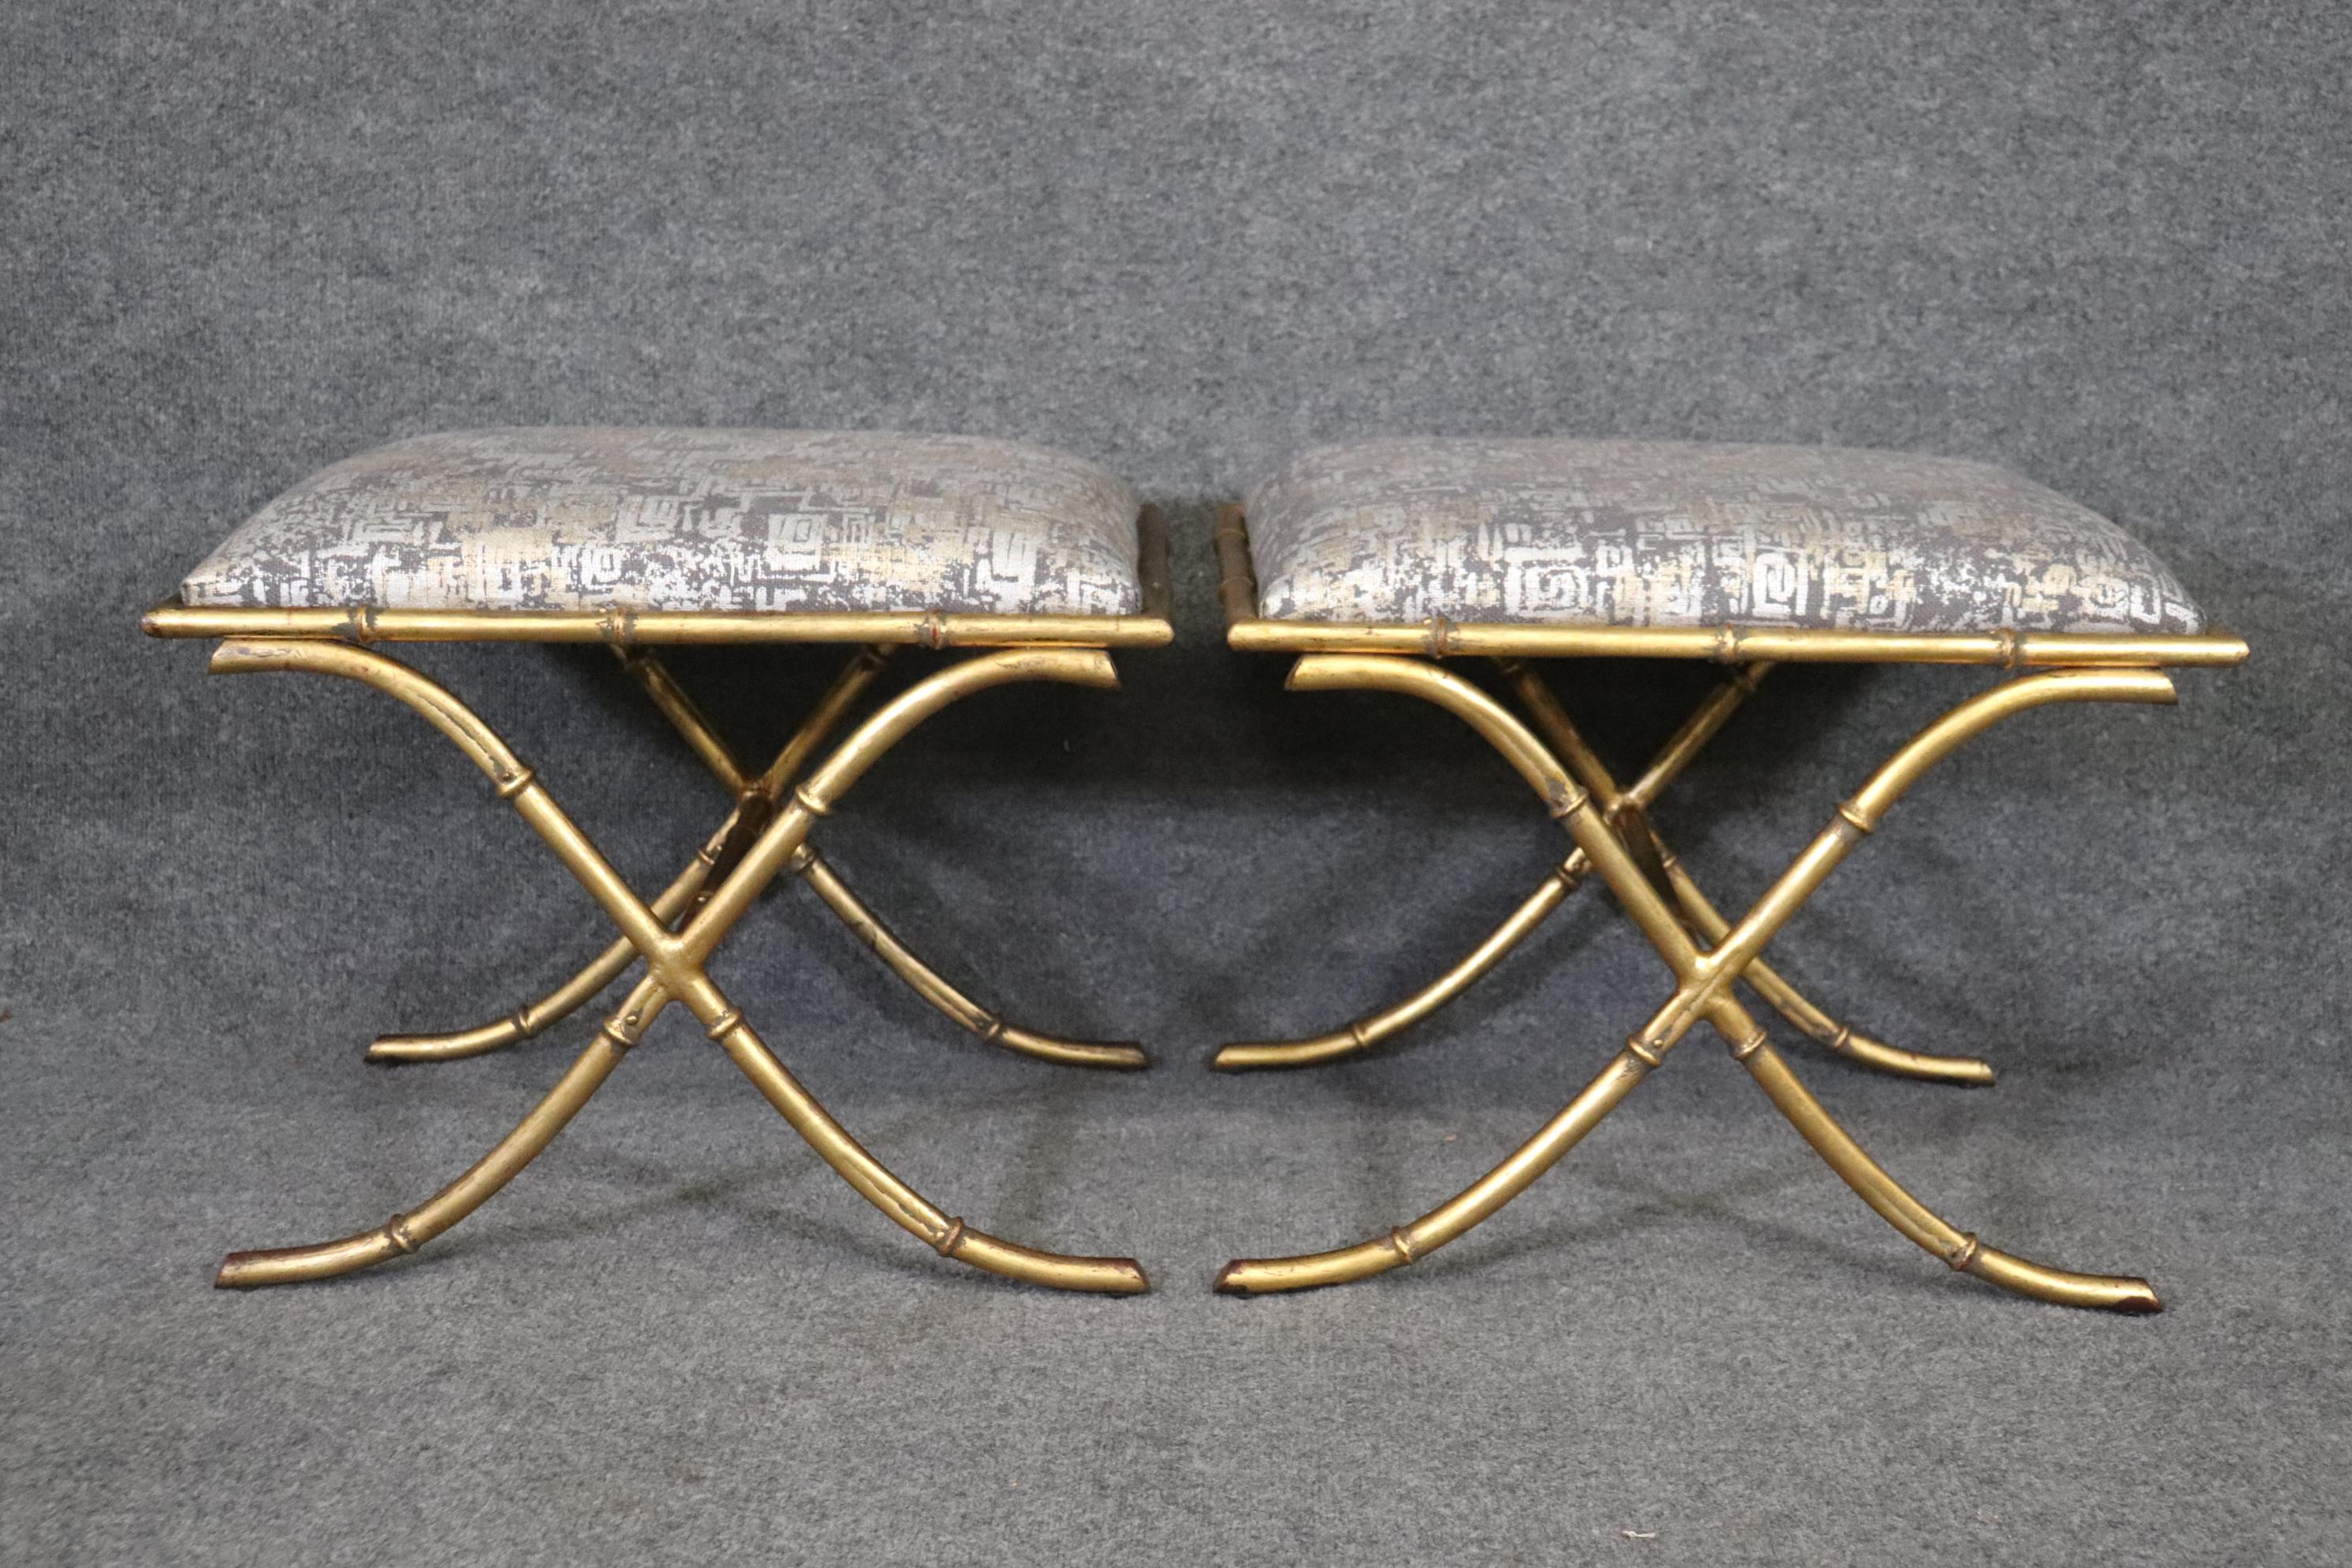 This is a stunning pair of gold gilded metal Maison Bagues style x form benches. They are absolutely gorgeous and very rare and hard to find. The benches measure 16 tall x 22 wide x 18 wide. They date to the 1960s era.